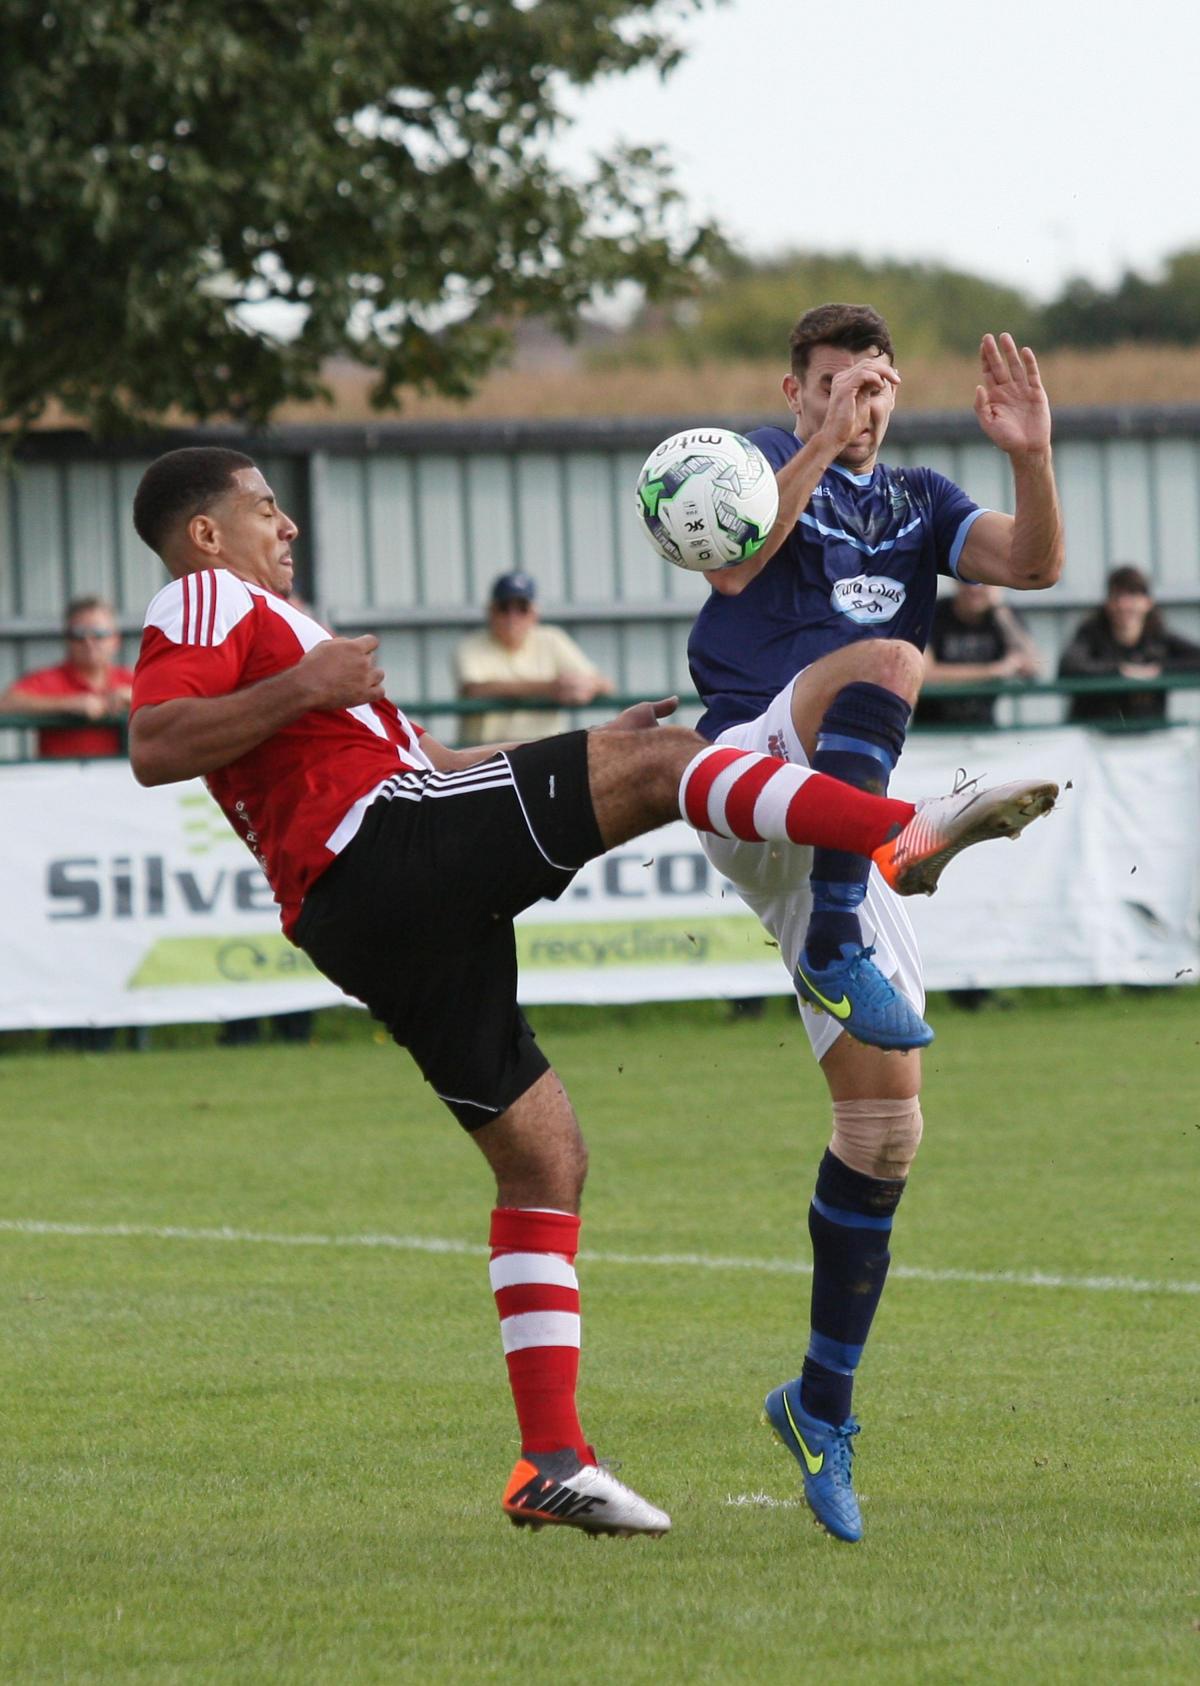 Kane O'Keefe challenges for the ball at Sholing